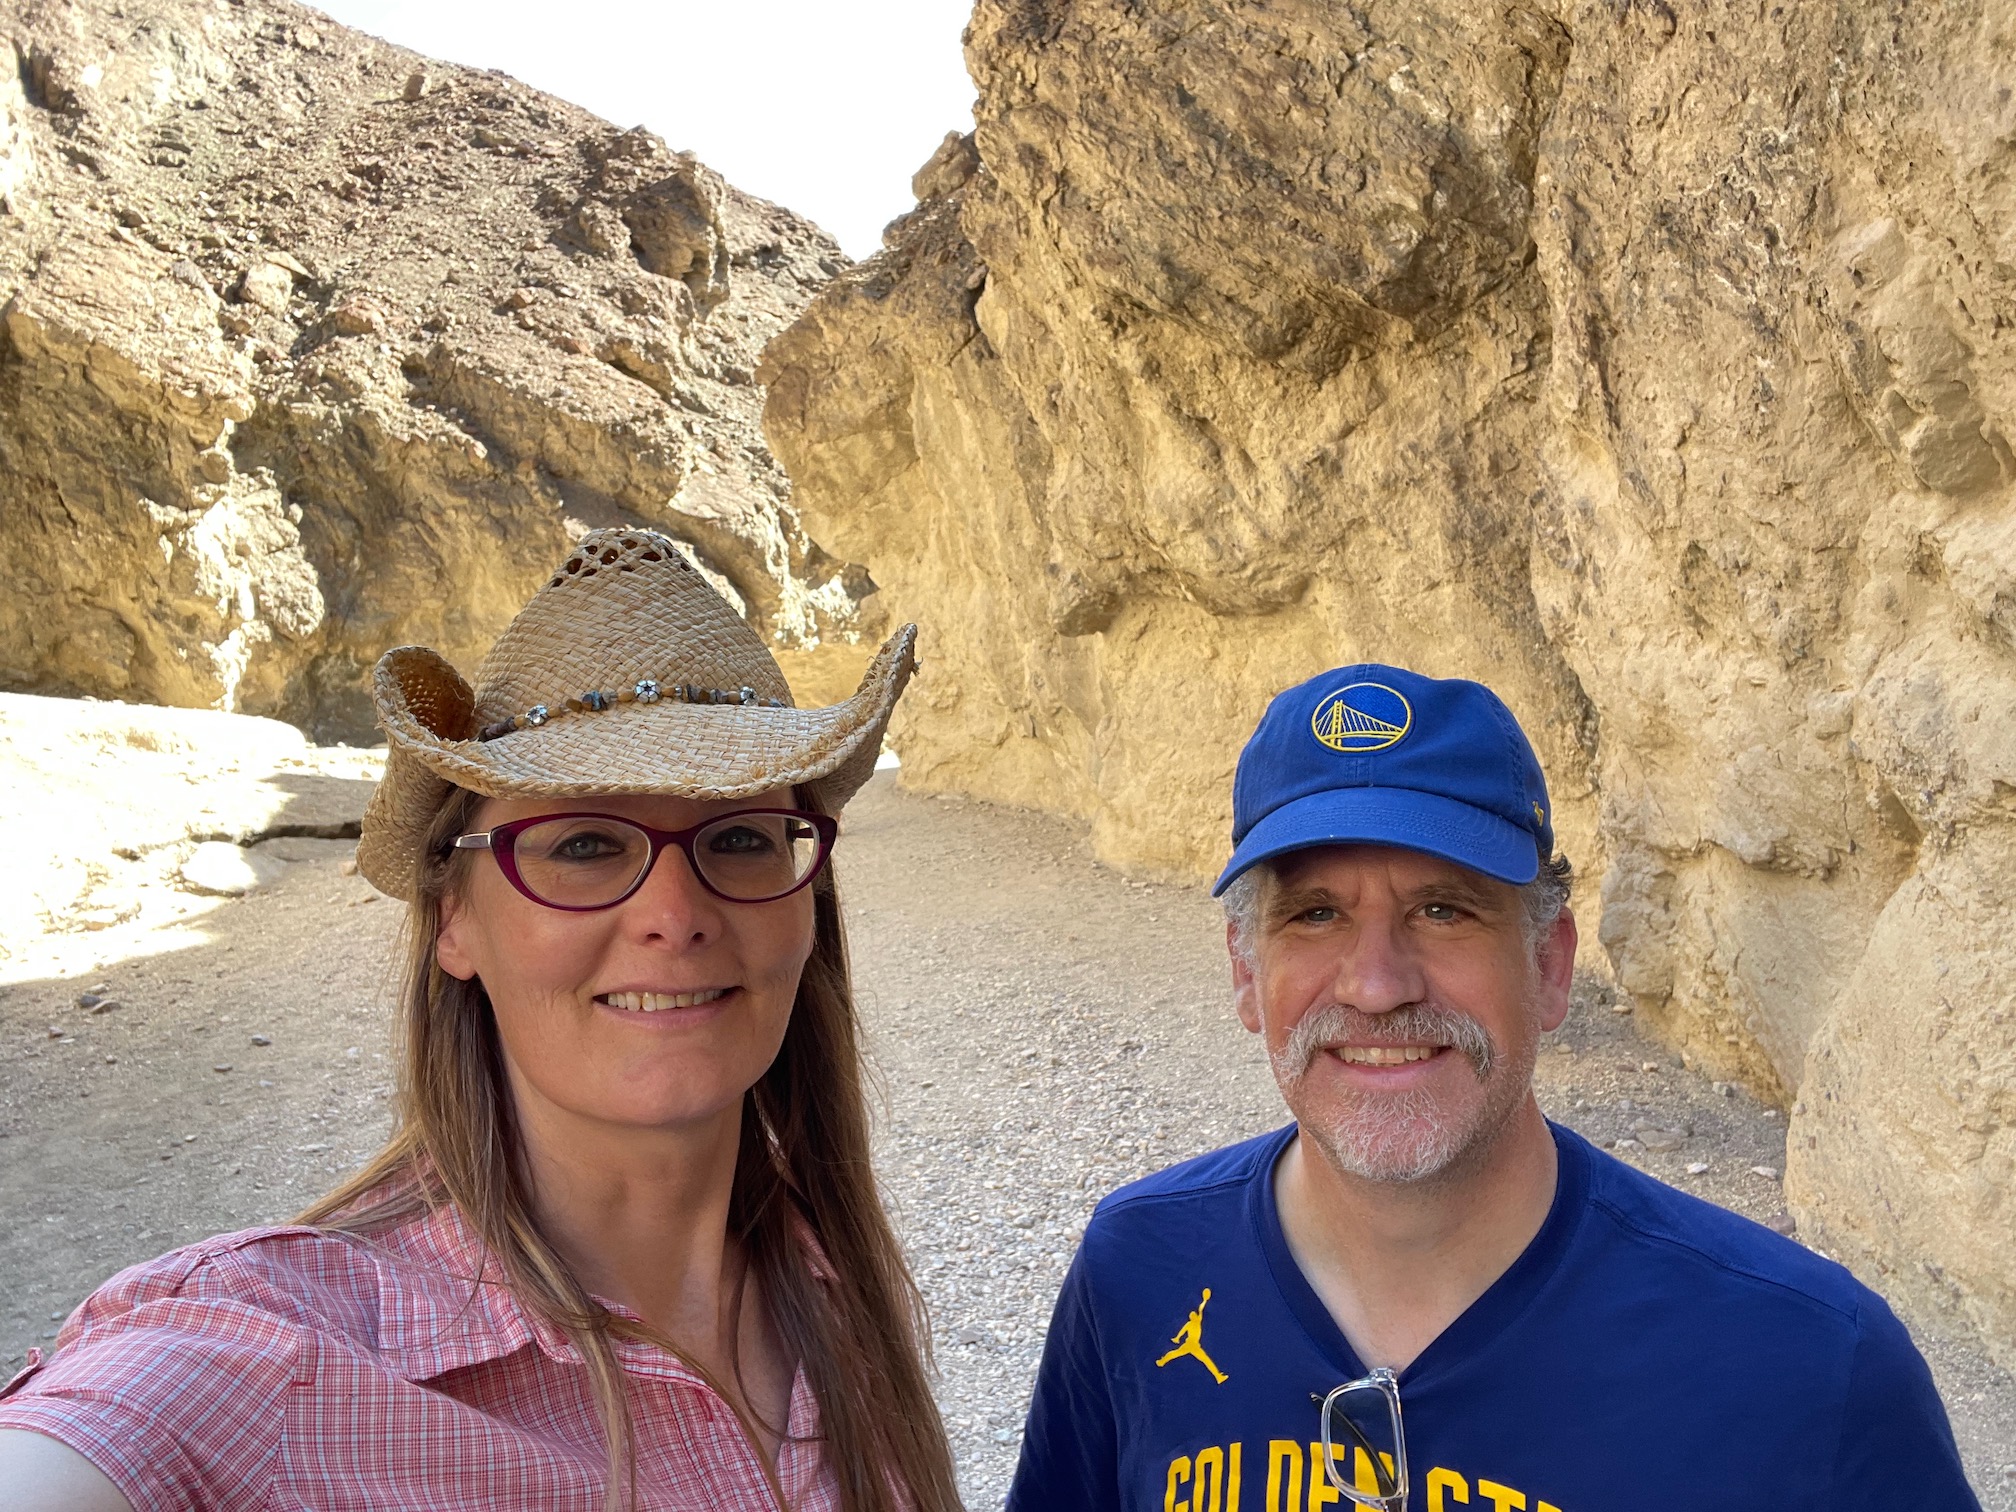 tracey & hunter in rocky golden canyon